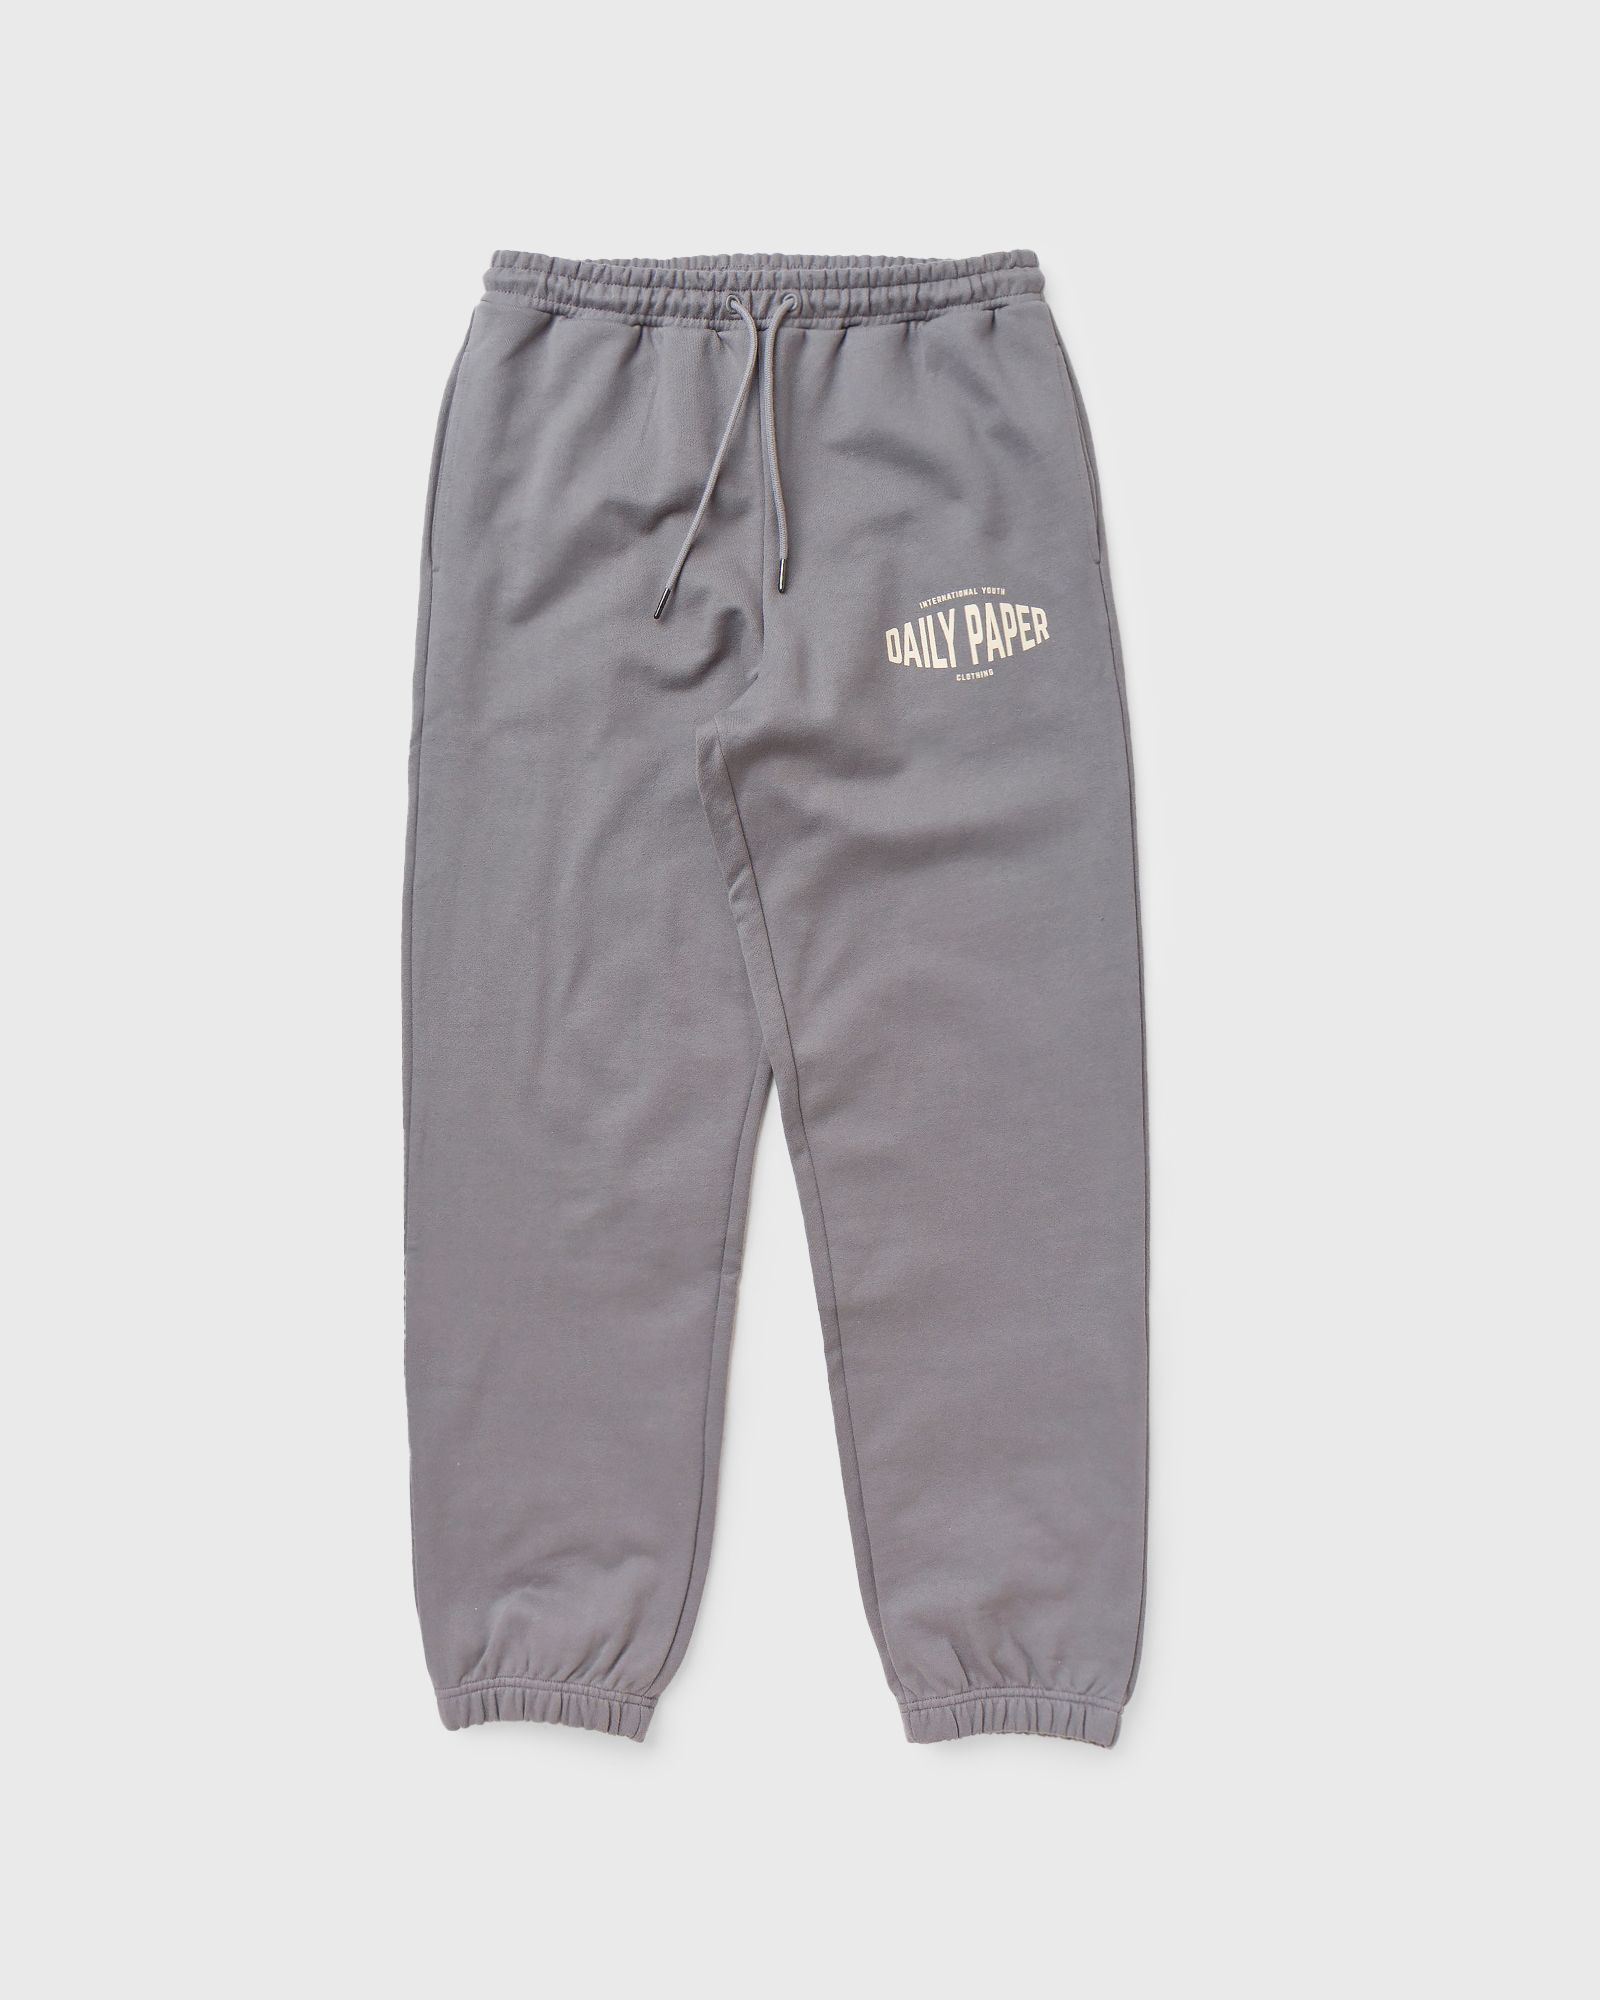 Daily Paper youth jogger CHARCOAL GREY men Pants now available at BSTN ...